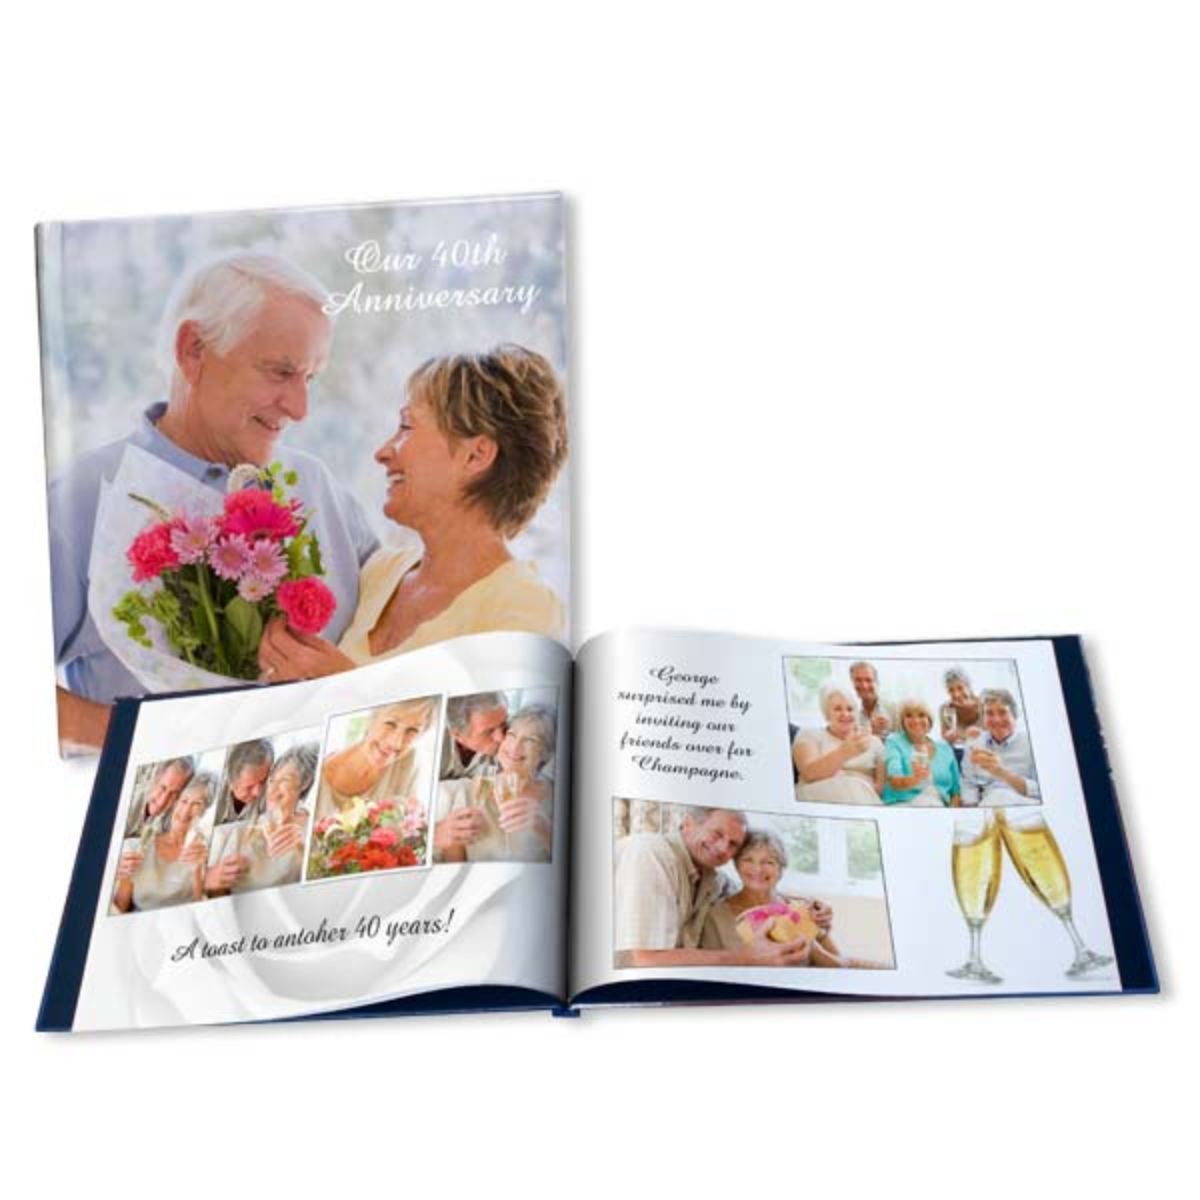 37. Create Your Own Love Storybook: The Perfect Anniversary Gift Idea for Him